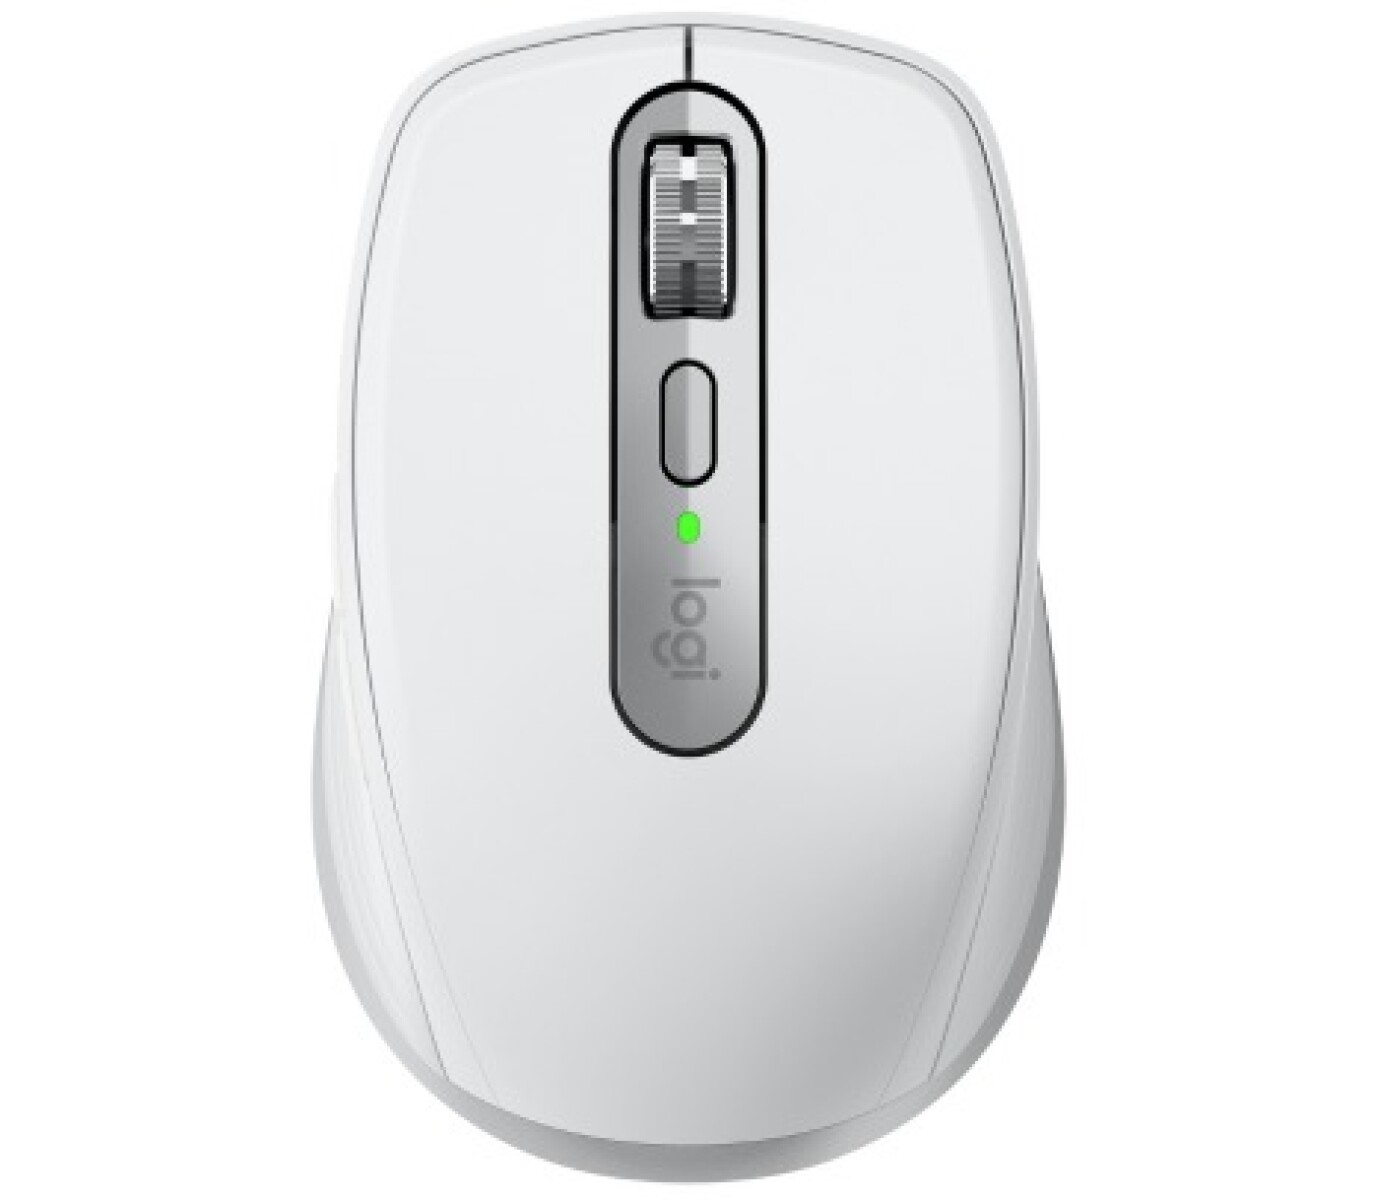 LOGITECH 910-006933 MOUSE MX ANYWHERE 3S PALE GREY INAL+BT - Logitech 910-006933 Mouse Mx Anywhere 3s Pale Grey Inal+bt 